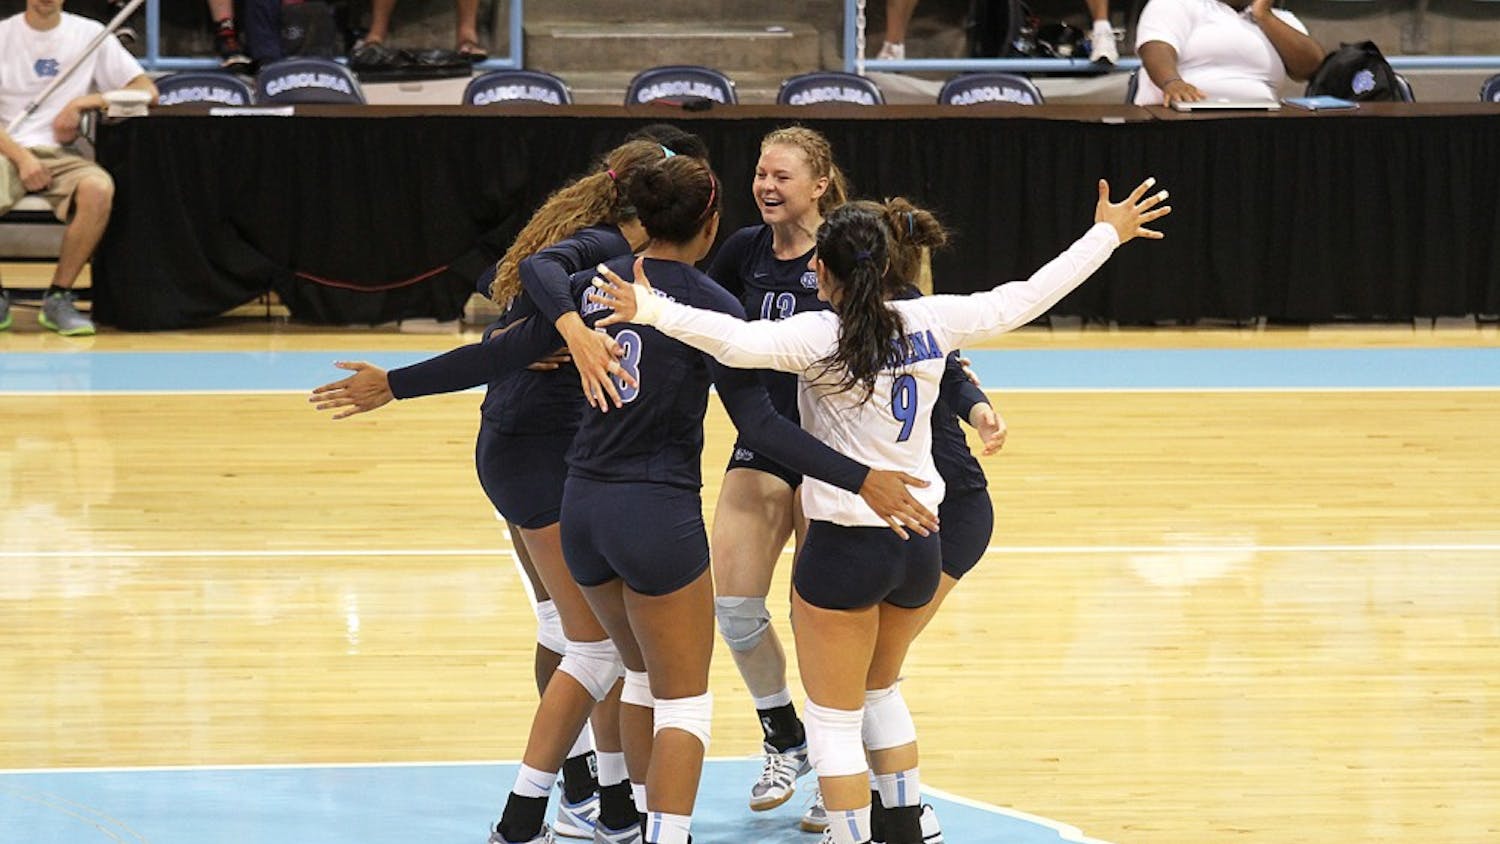 UNC's volleyball team embrace between plays during their match again Georgia Southern Saturday.  They would go on to win 3-0.